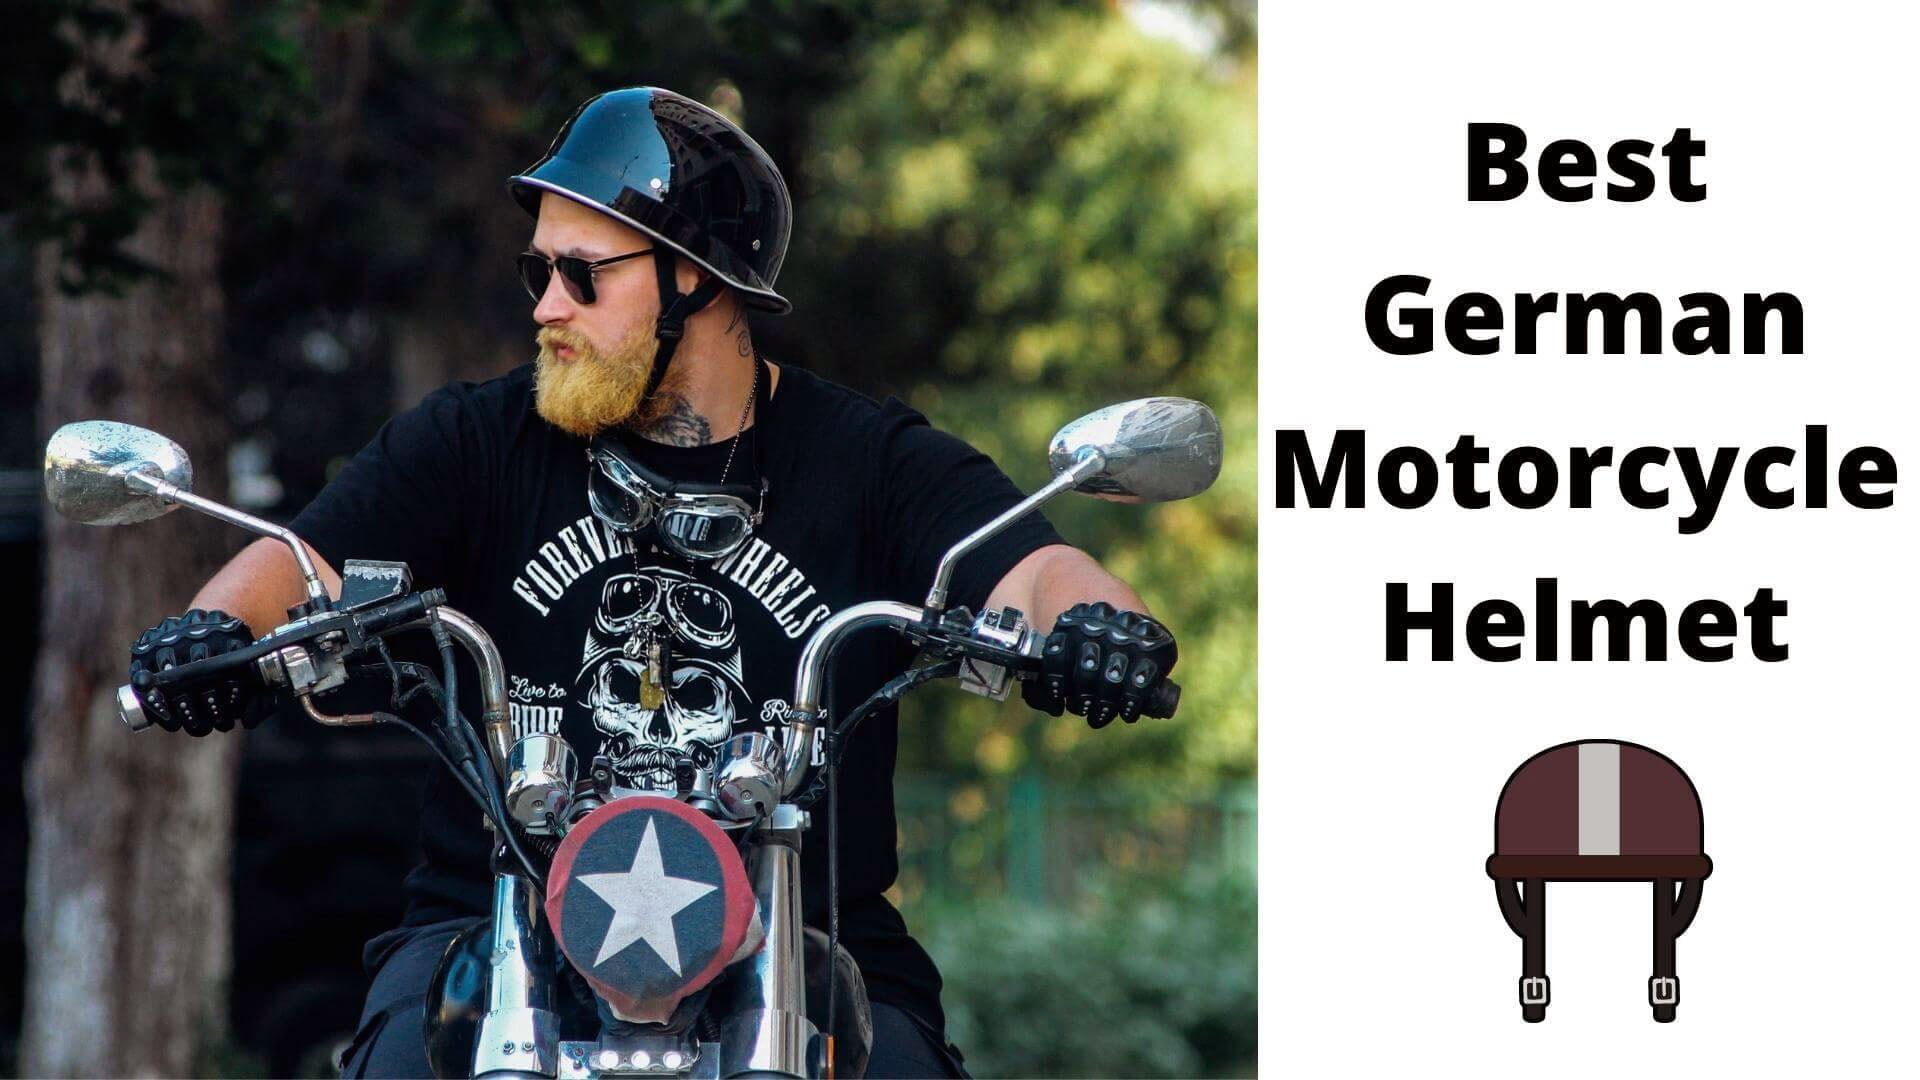 The 11 Best German Motorcycle Helmets For Safety And Style